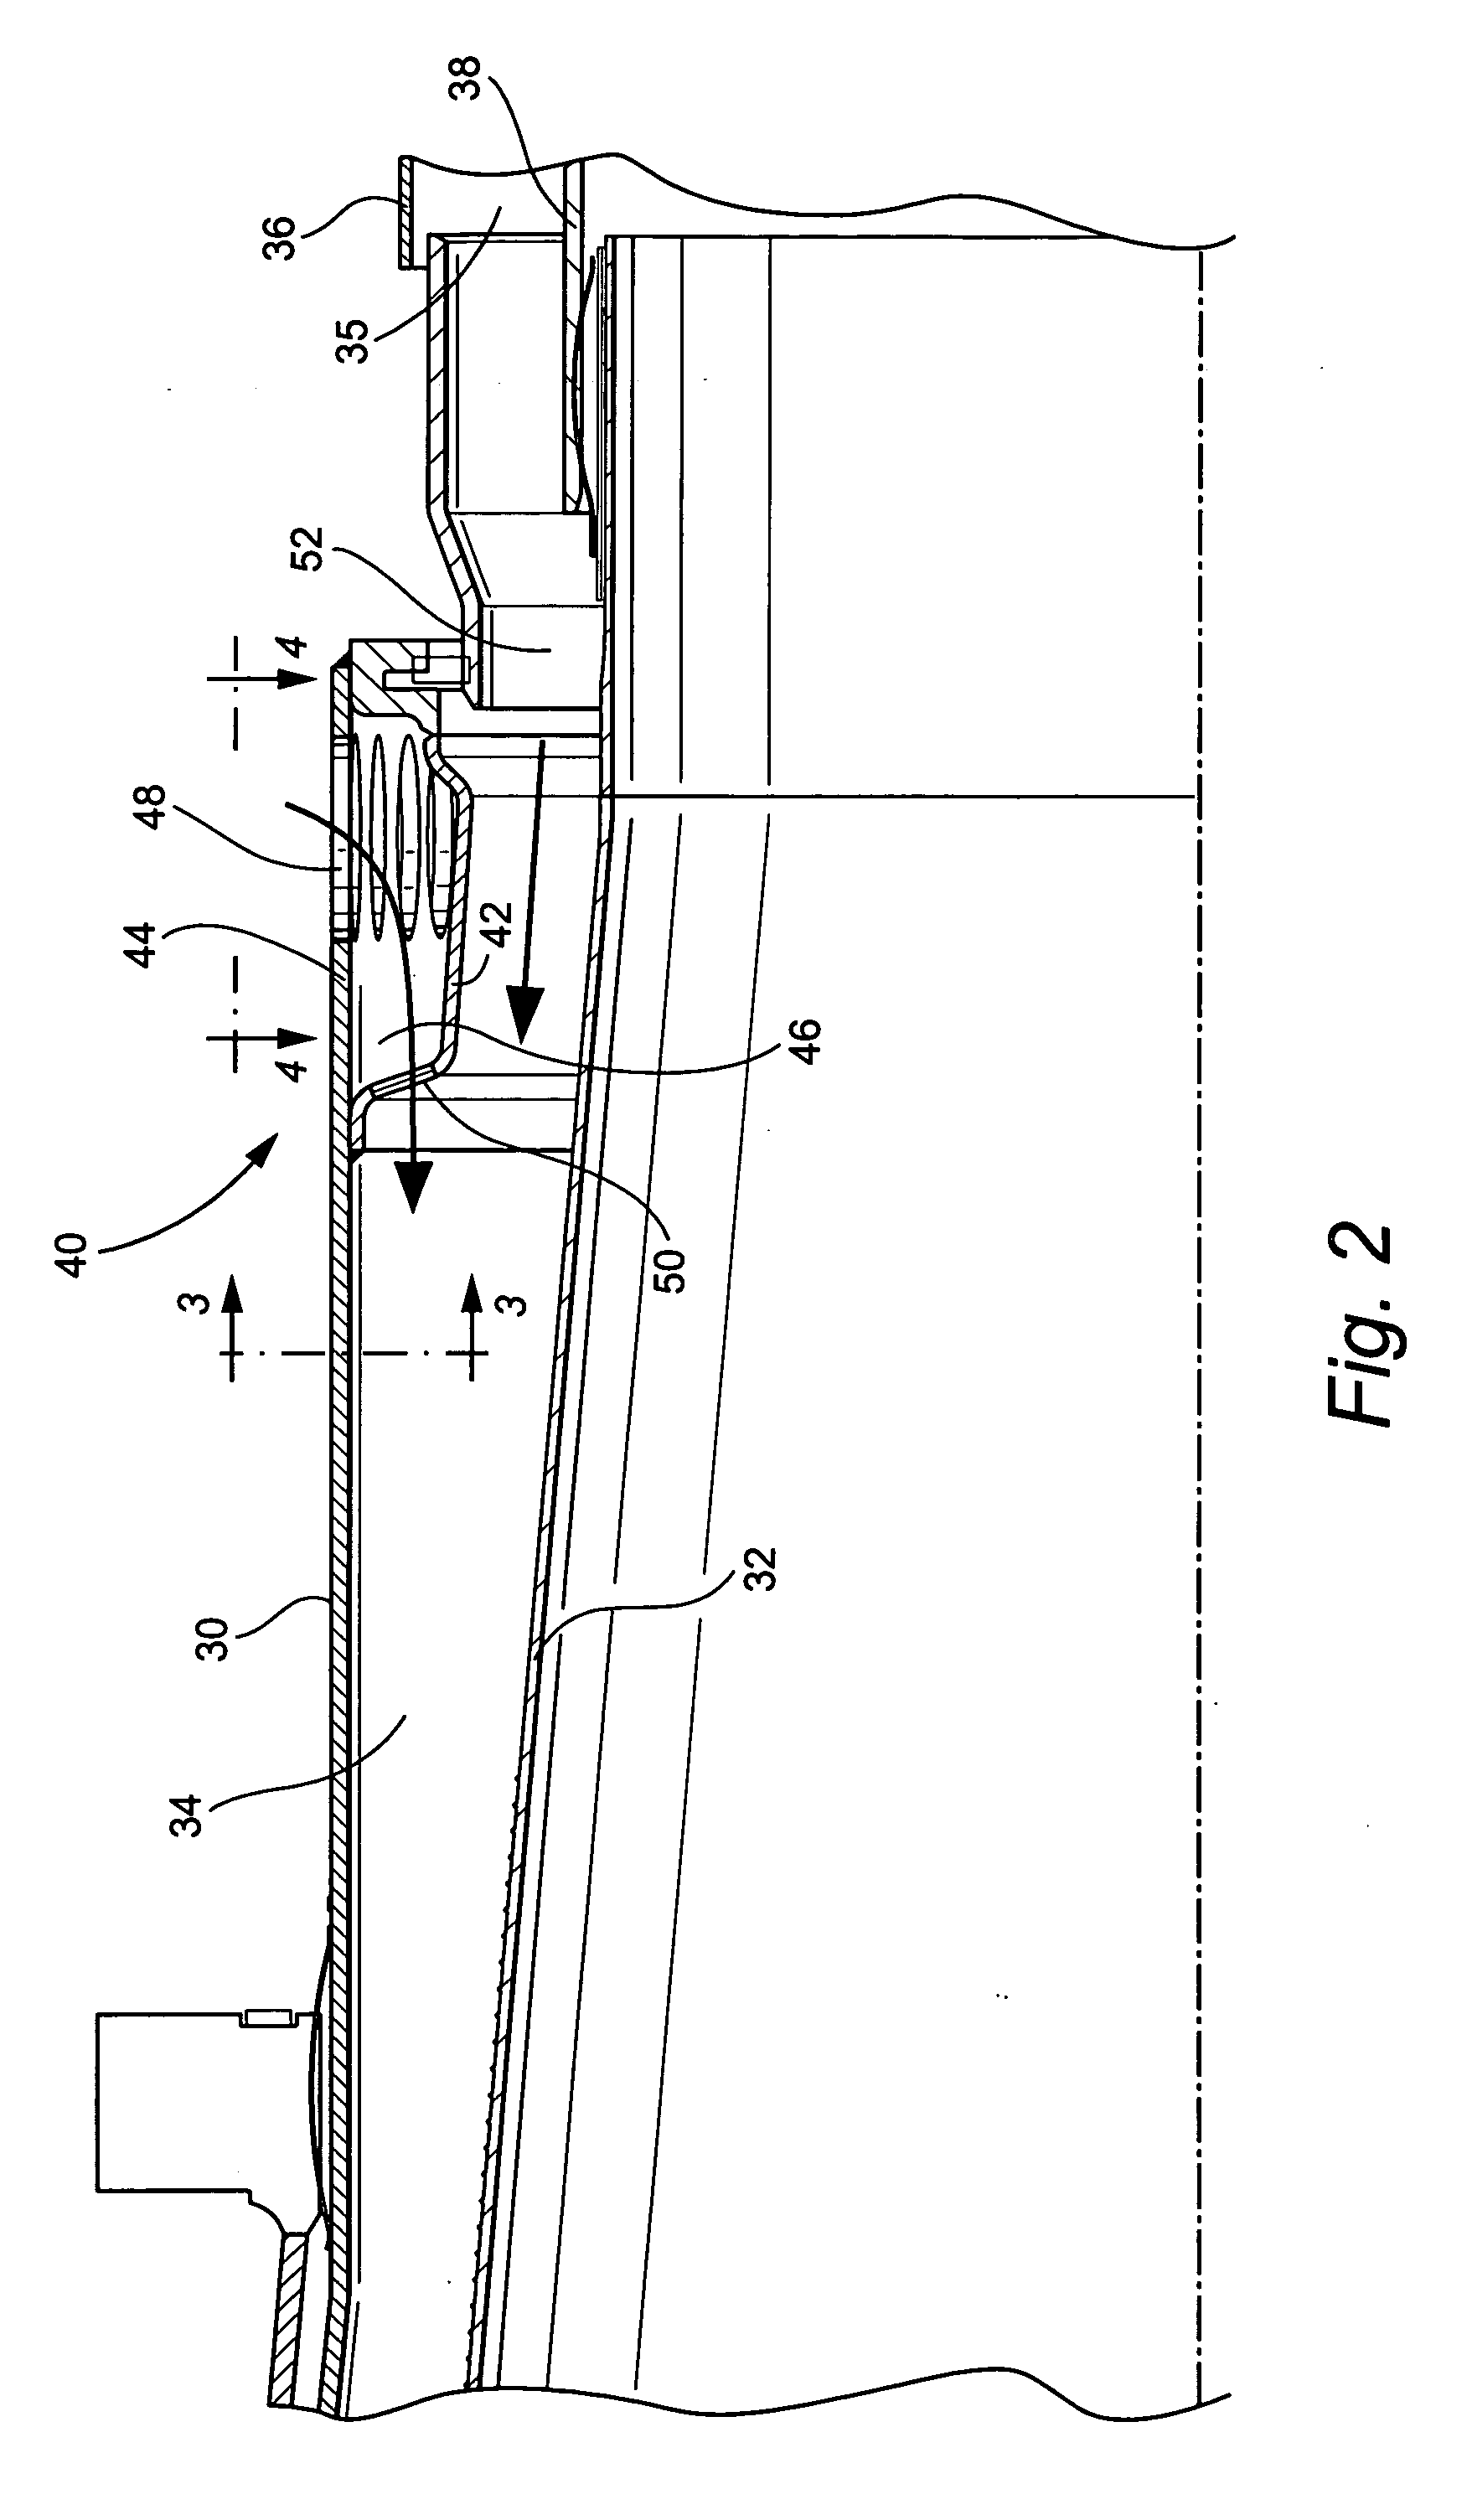 Axial flow sleeve for a turbine combustor and methods of introducing flow sleeve air